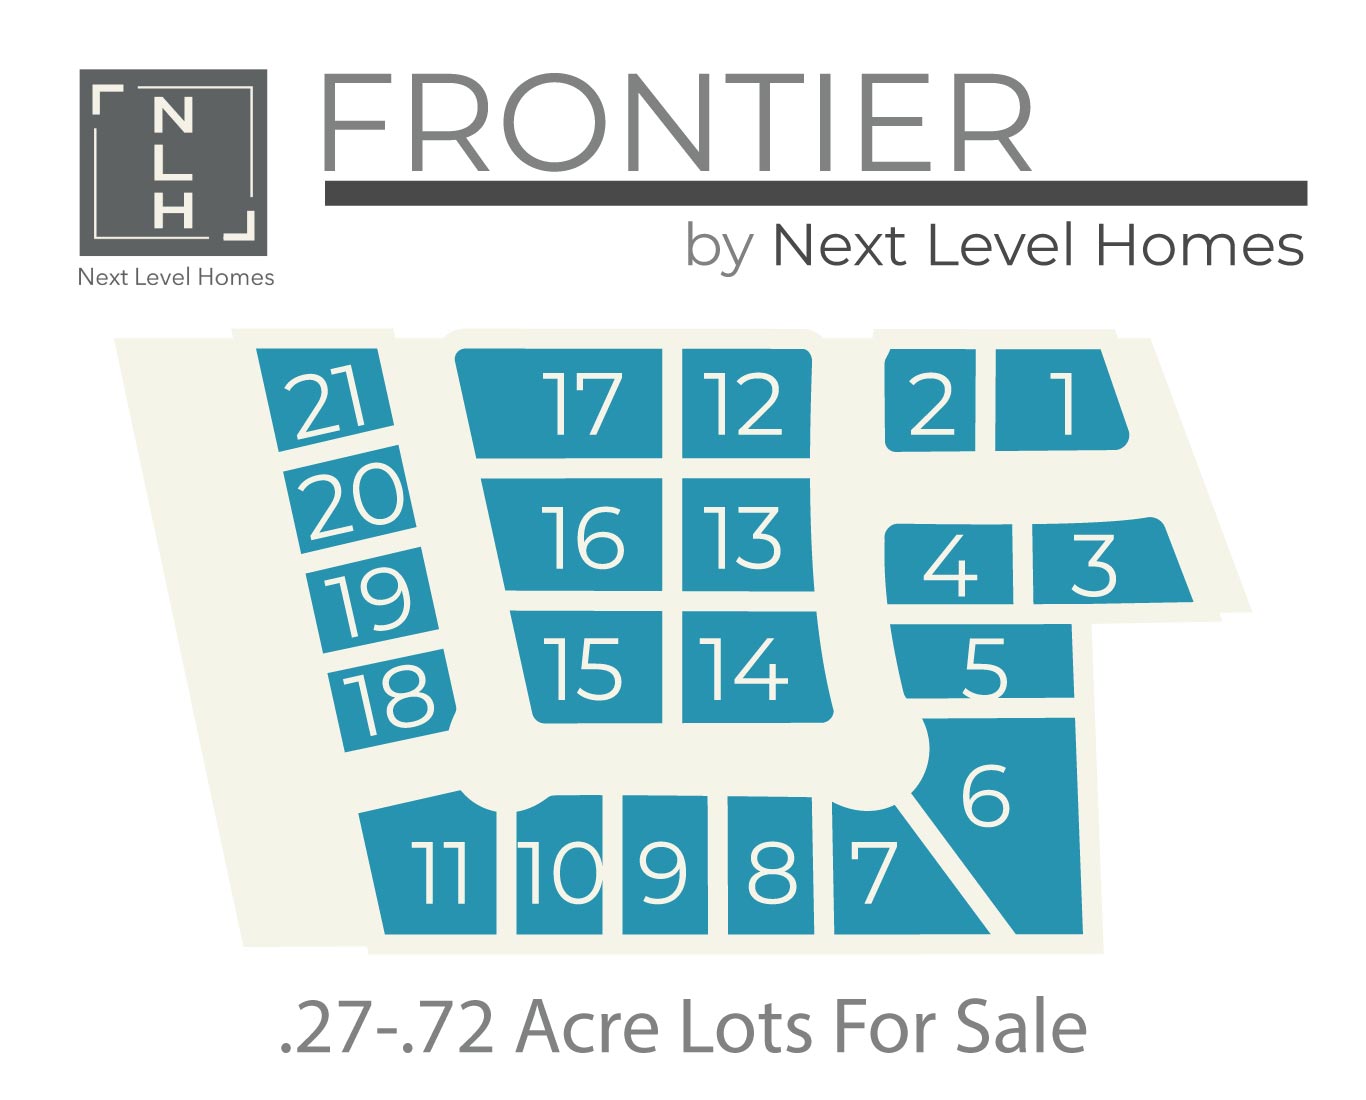 Lots and Homes available in Southern Utah by Next Level Homes